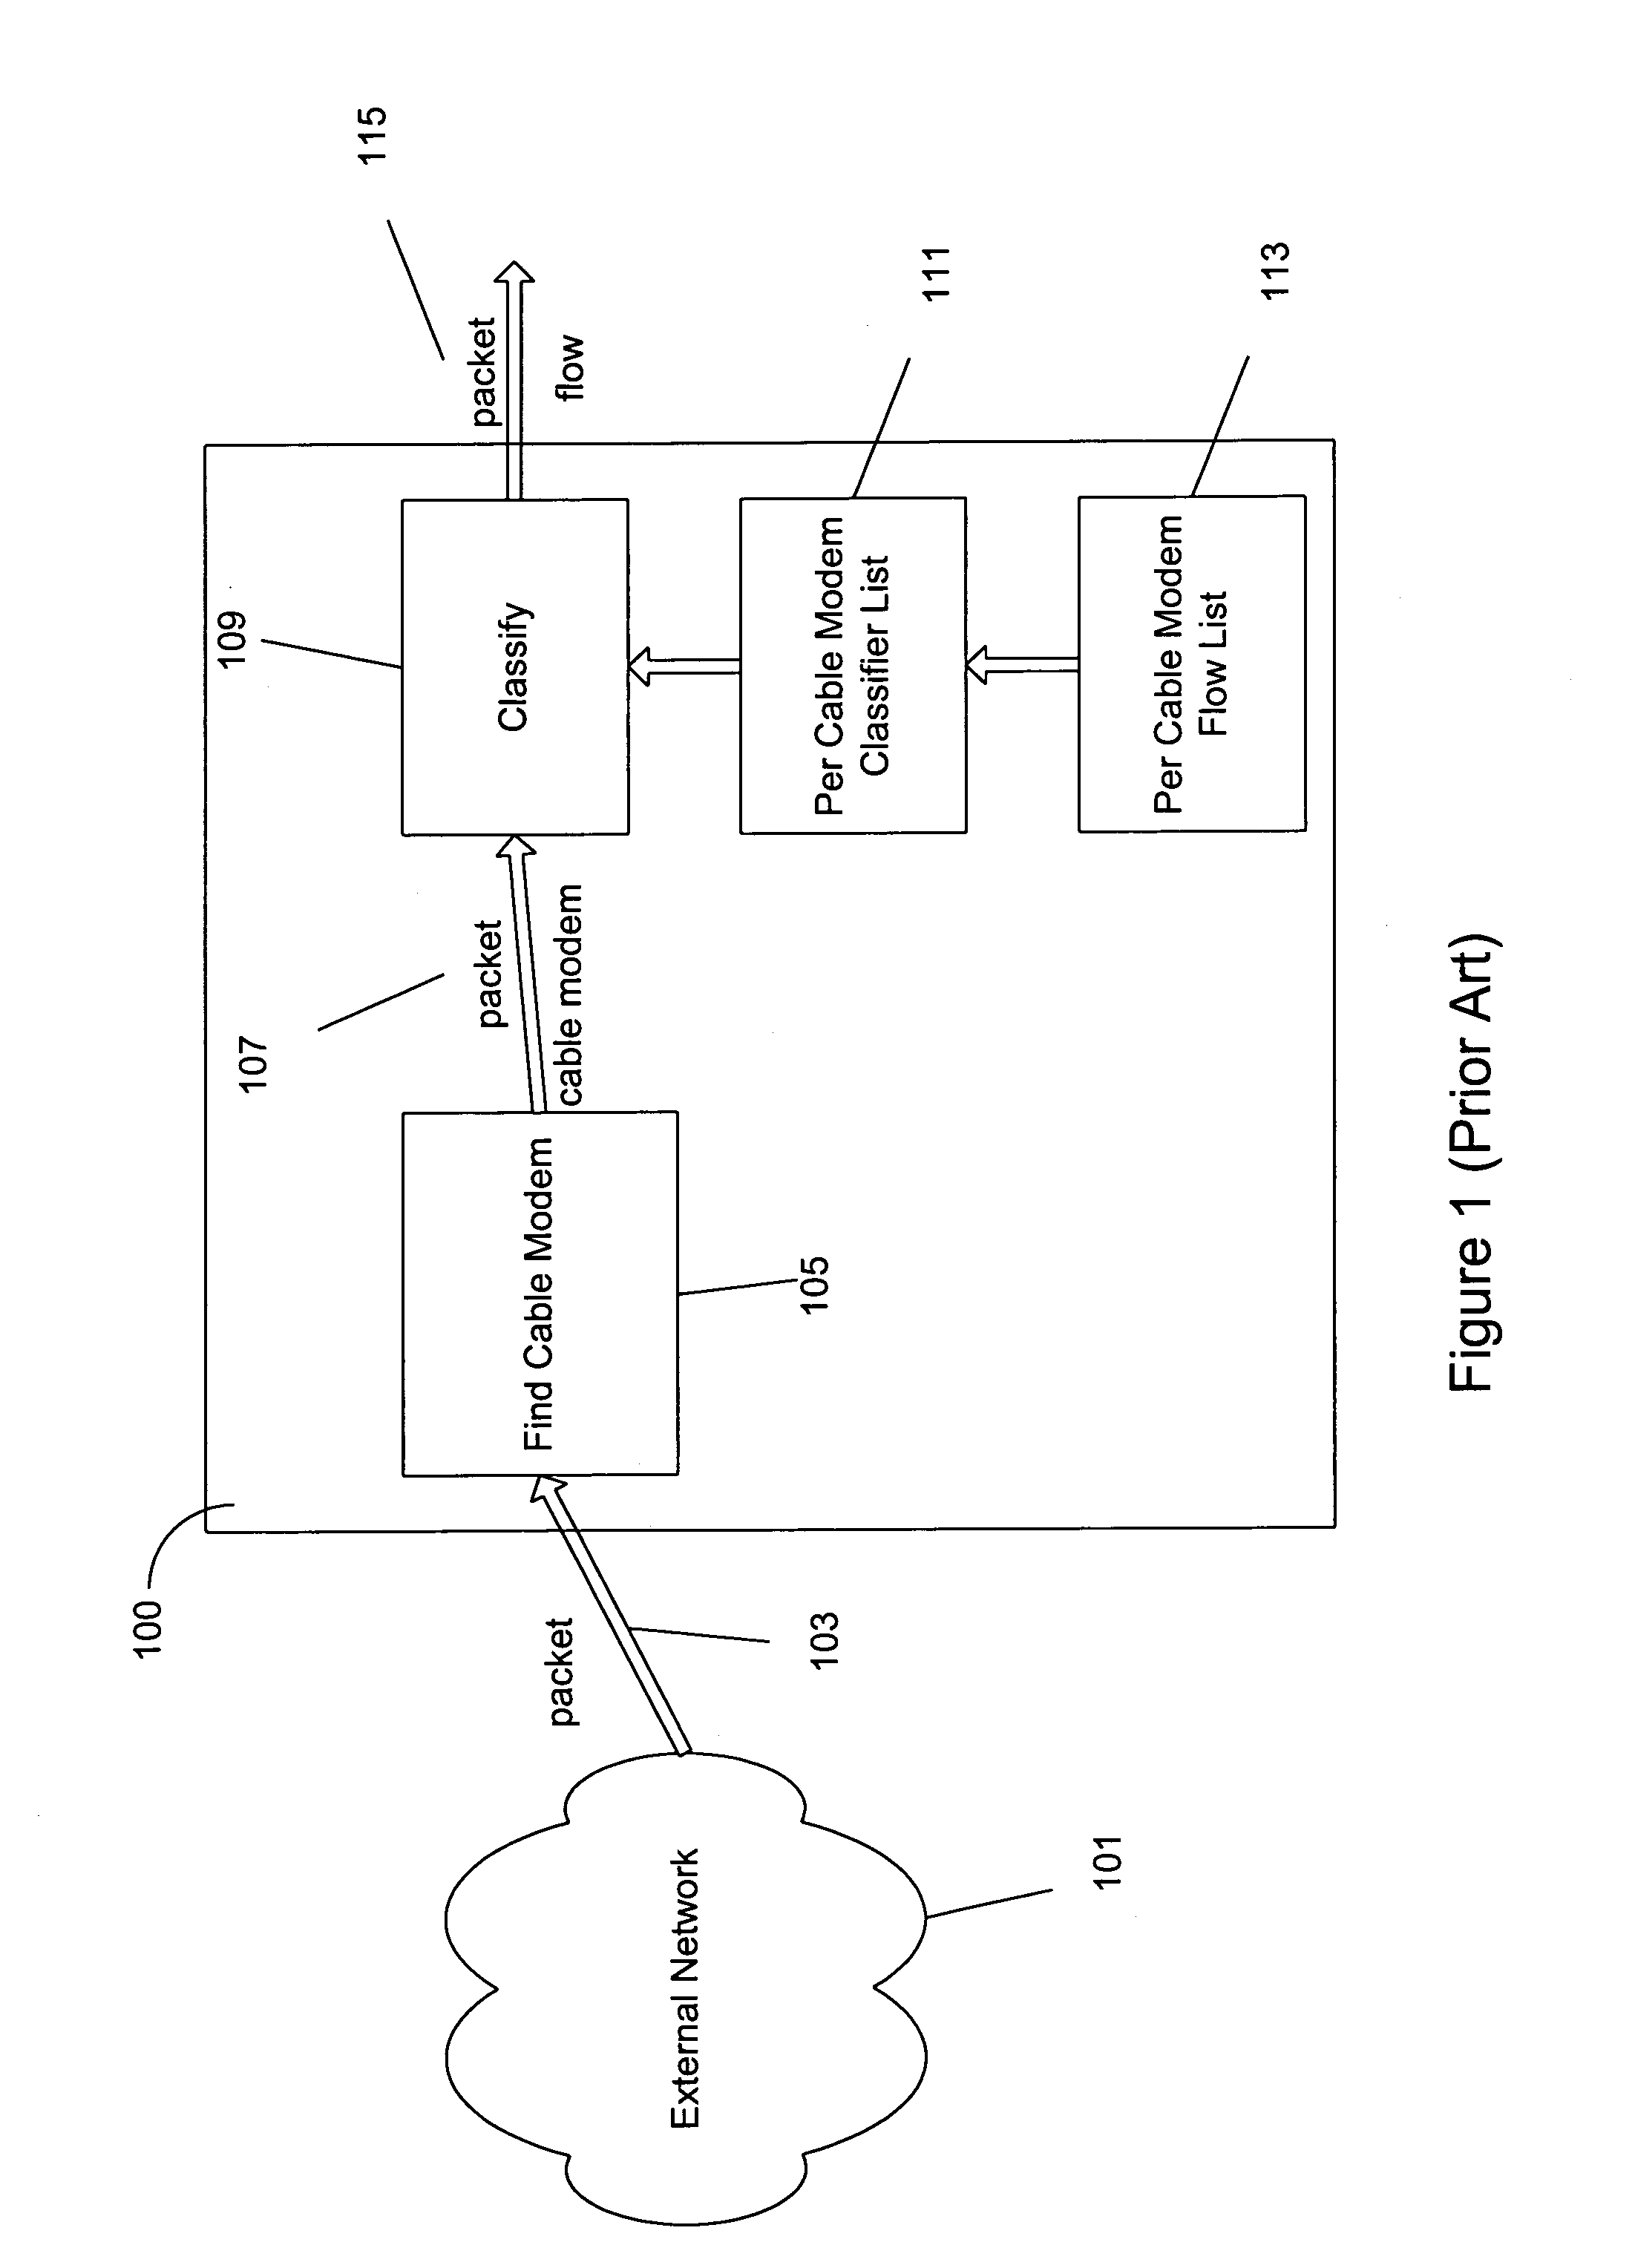 Method and apparatus for applying quality of service to multicast streams transmitted in a cable network